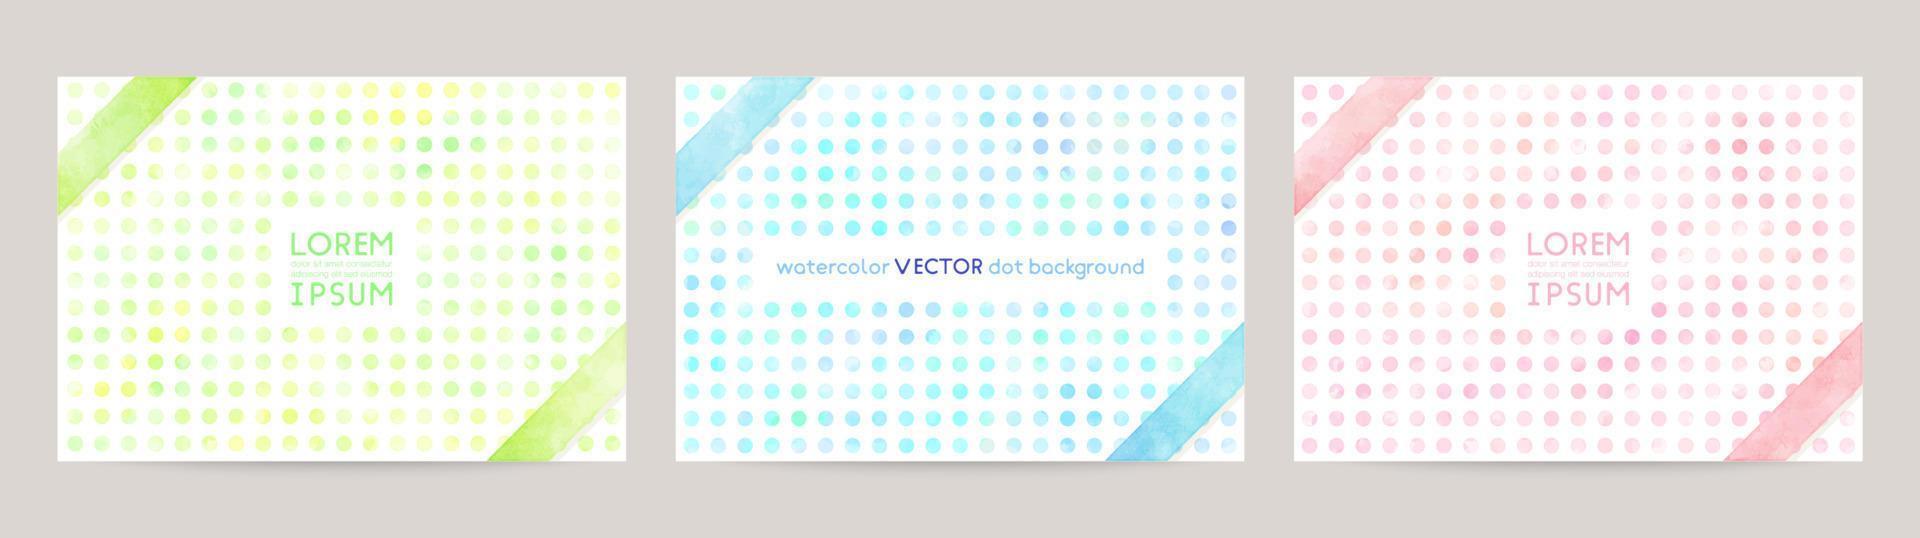 Set of colorful vector watercolor backgrounds with white space for text. Set of cards for wedding, greetings, birthday. backgrounds for web banners design. green, blue, pink